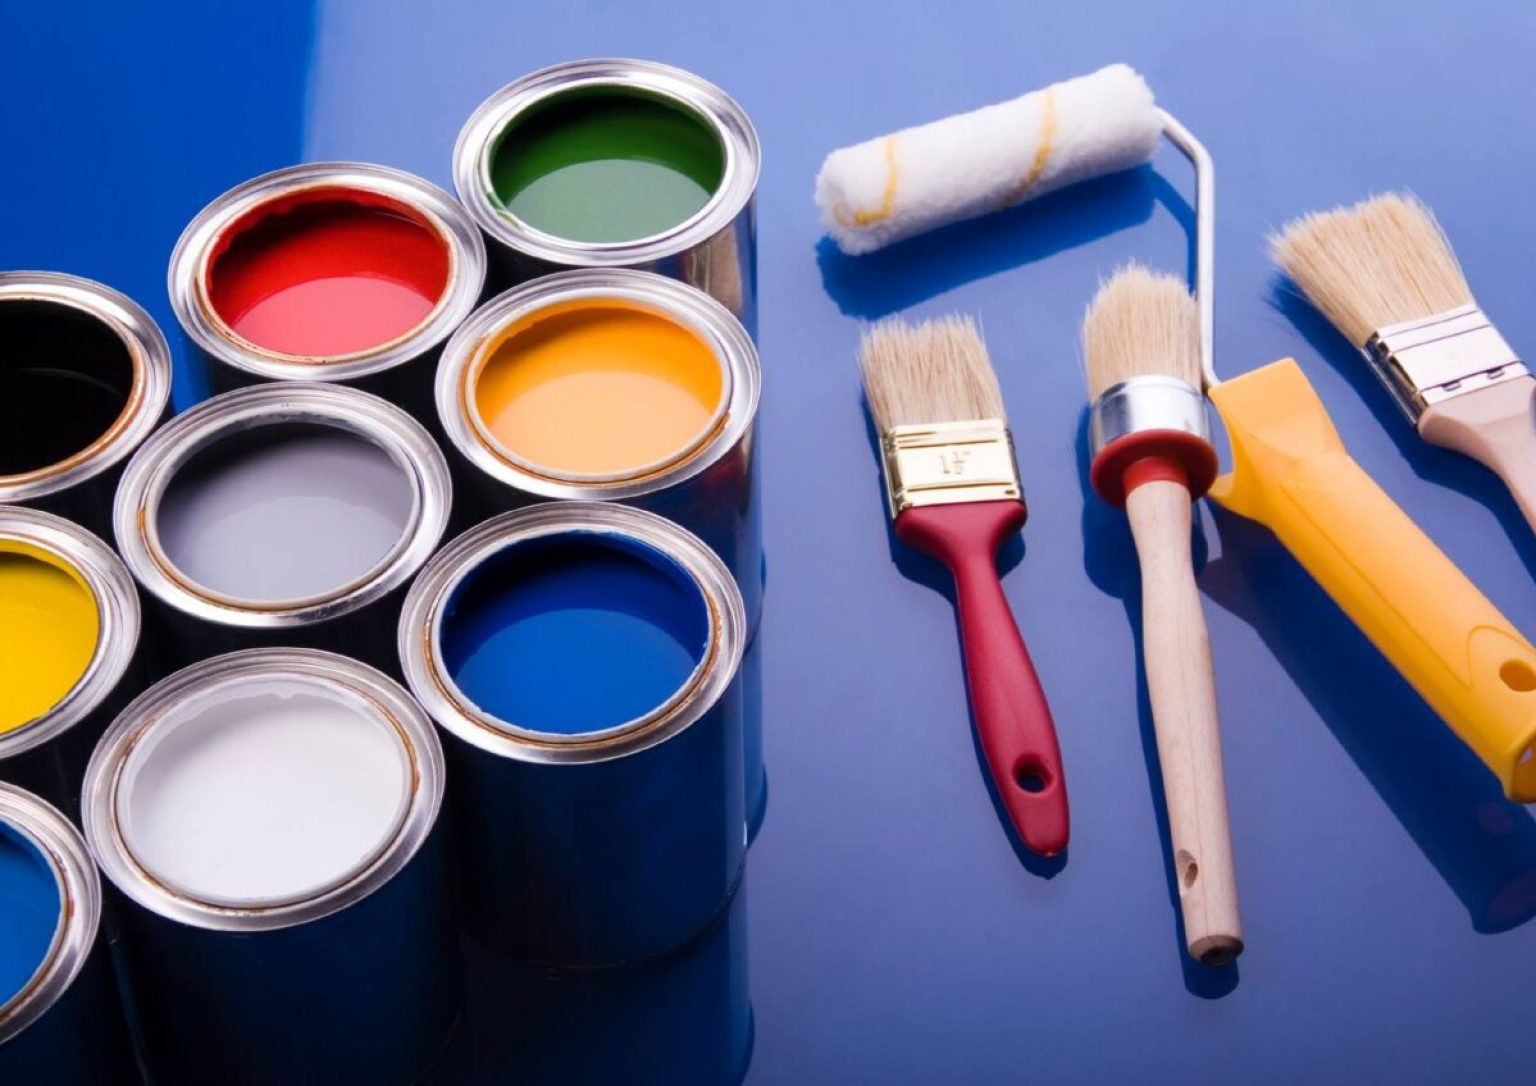 Acrylic Paints Market: Growing Demand for Artistic Creations Drives Market Growth